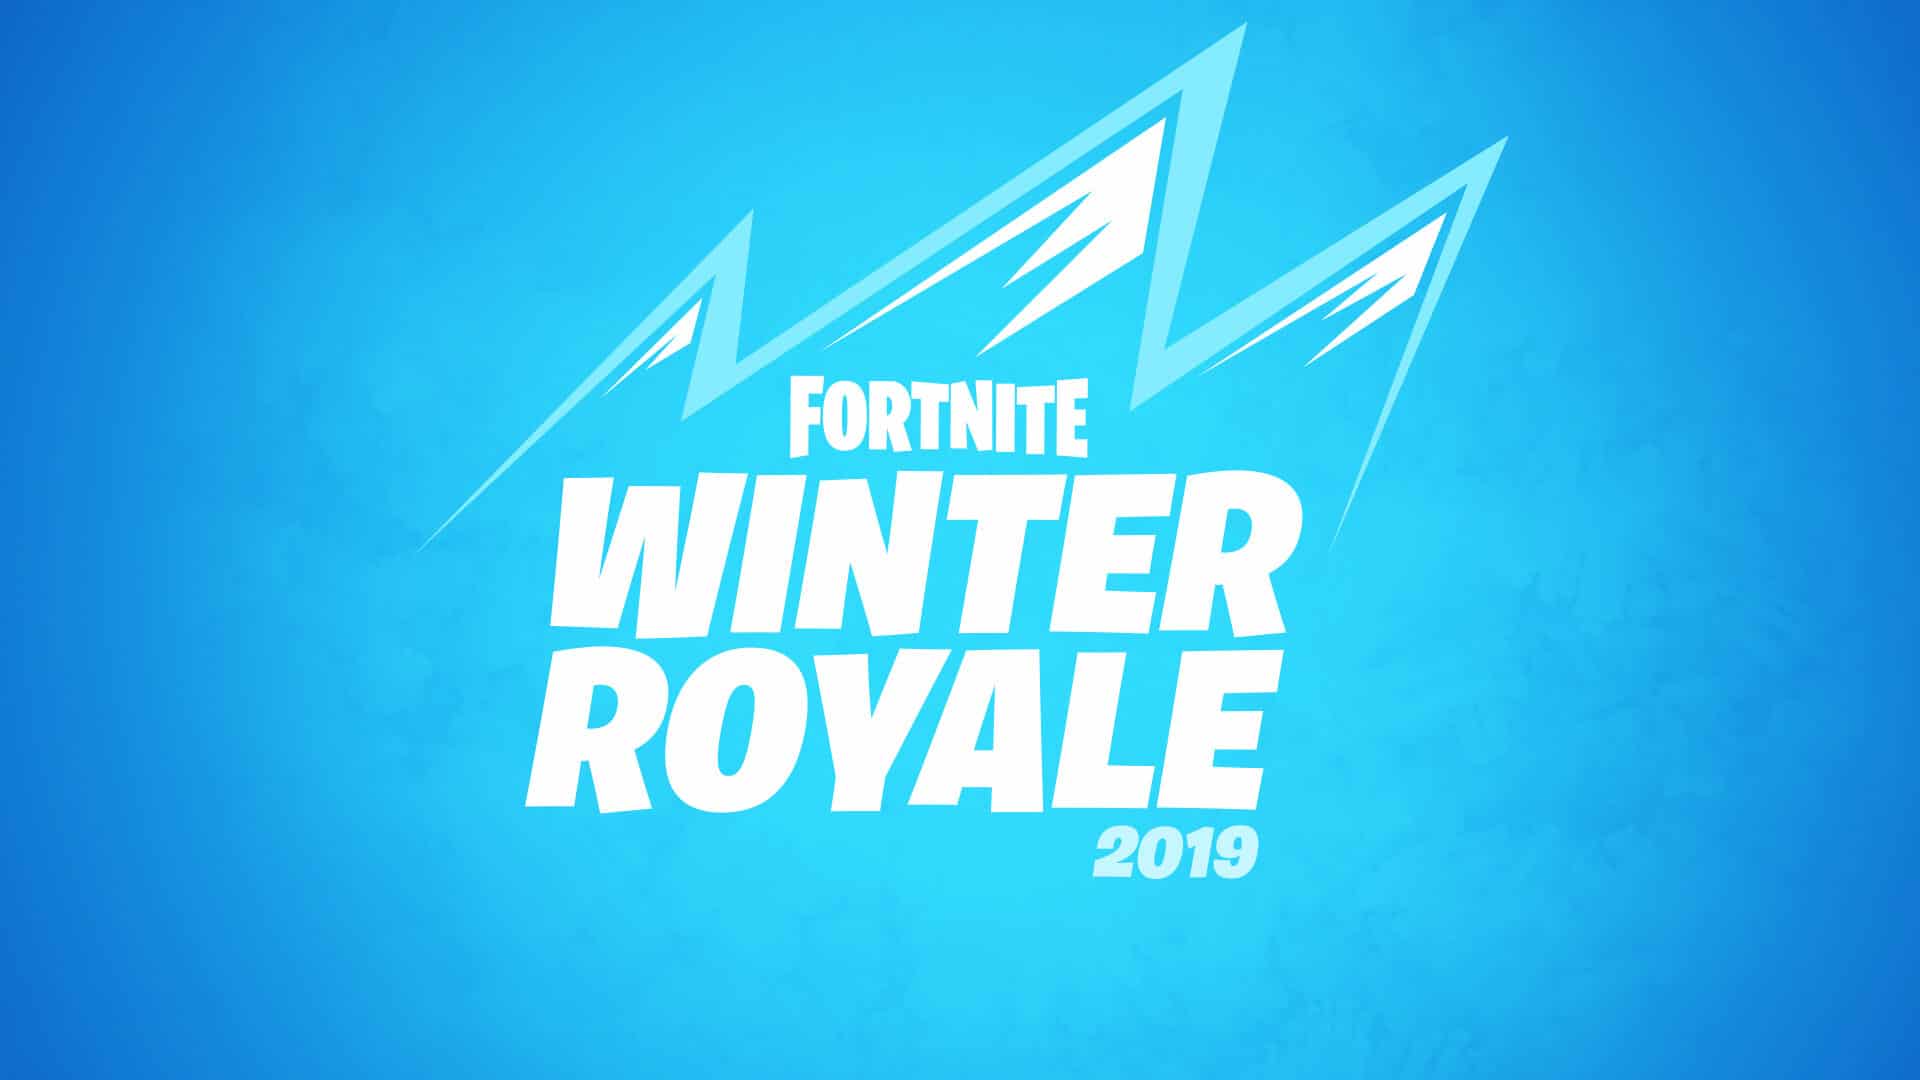 Typical Gamer, let's try this out: I'm looking for a duo partner for Winter Royale! Gotta play on West and be mega cracked. Must like cash money 'cause we